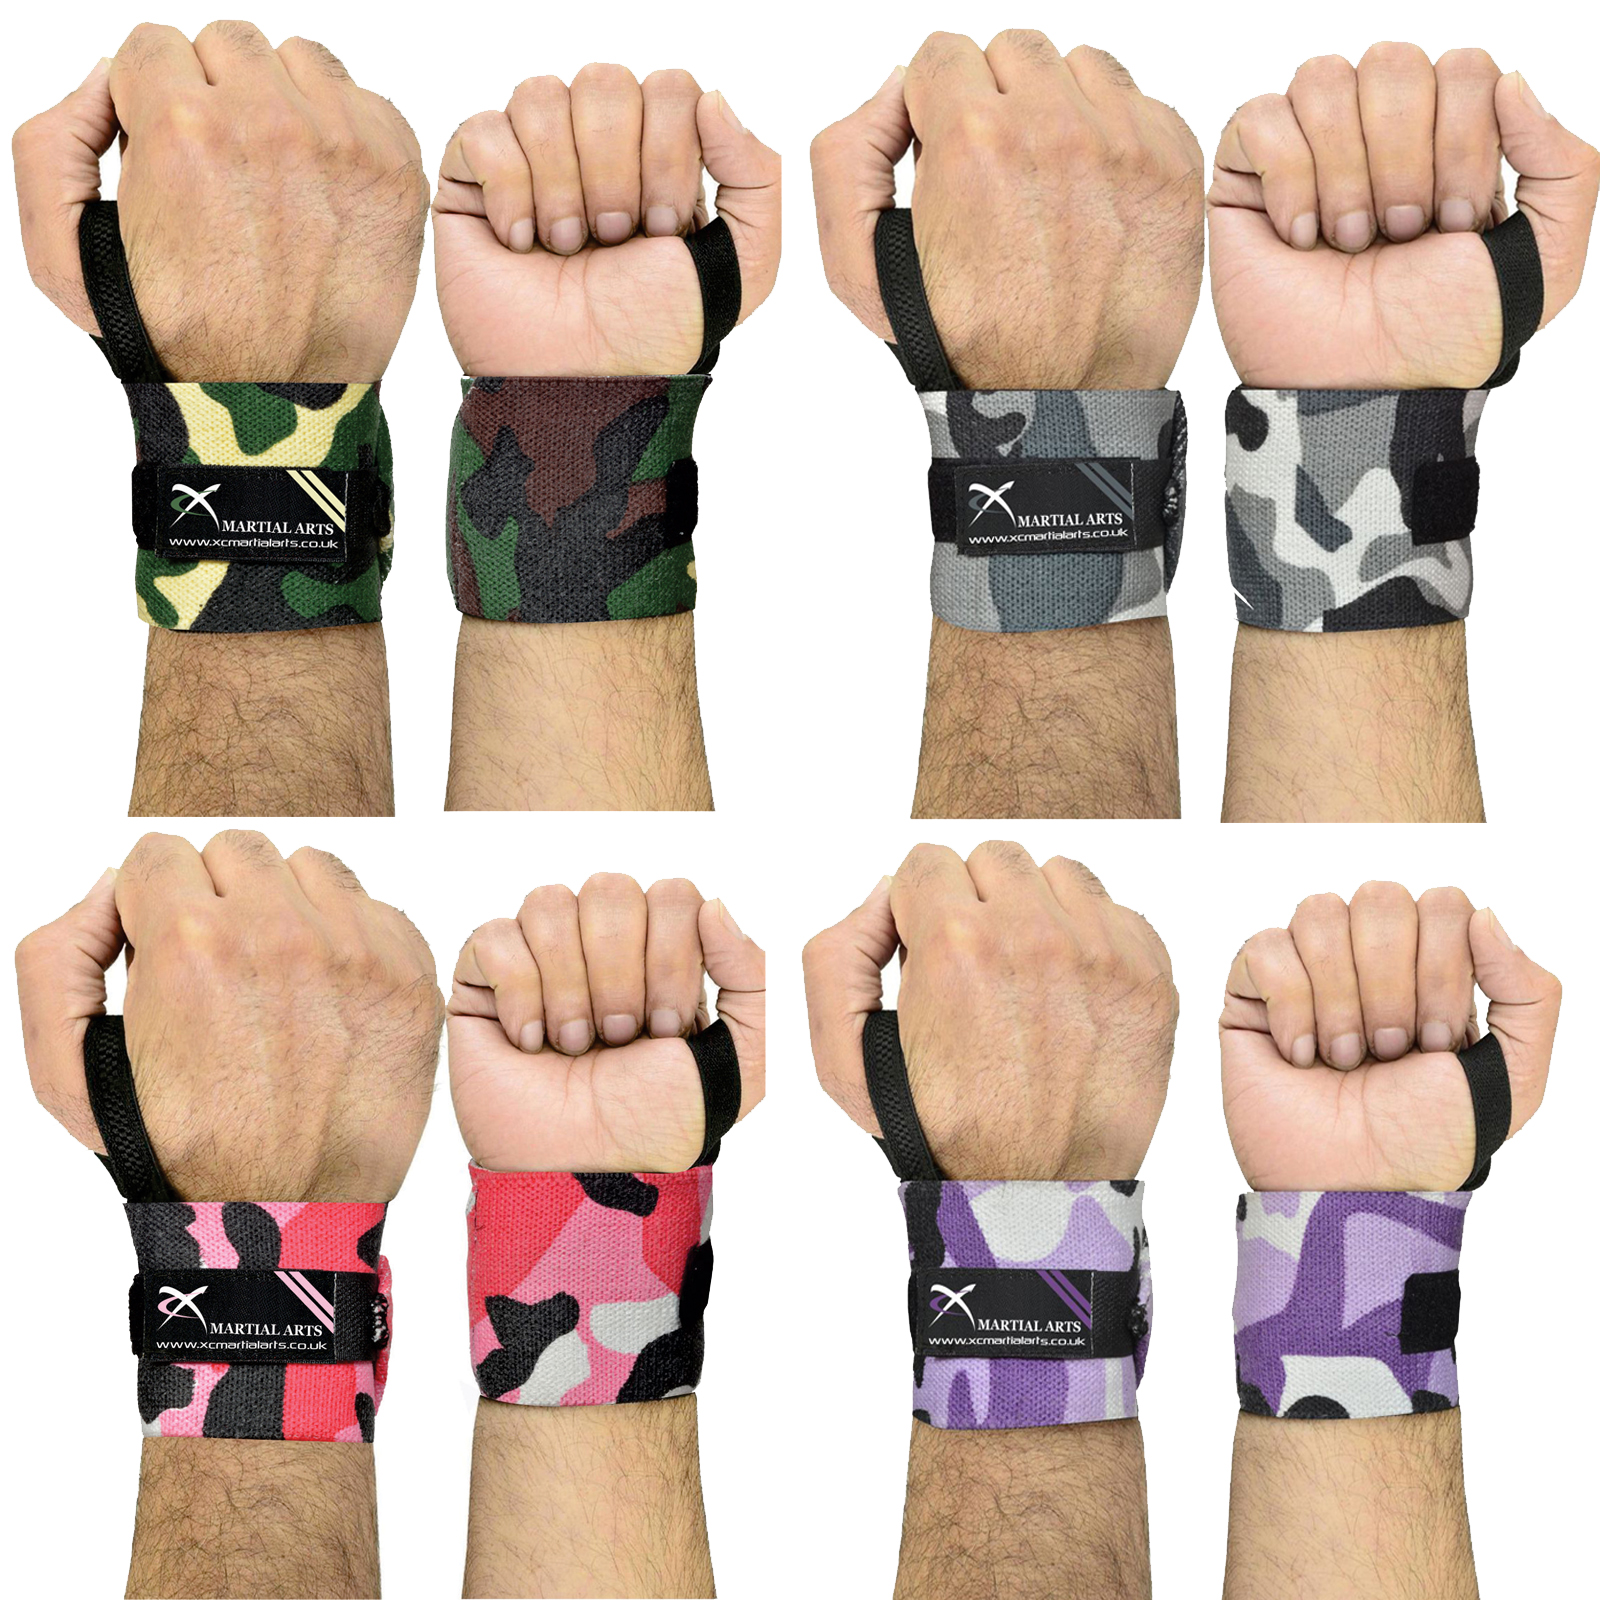 Weight Lifting Wrist Wraps Bandage Hand Support Gym Straps Brace grip pads 